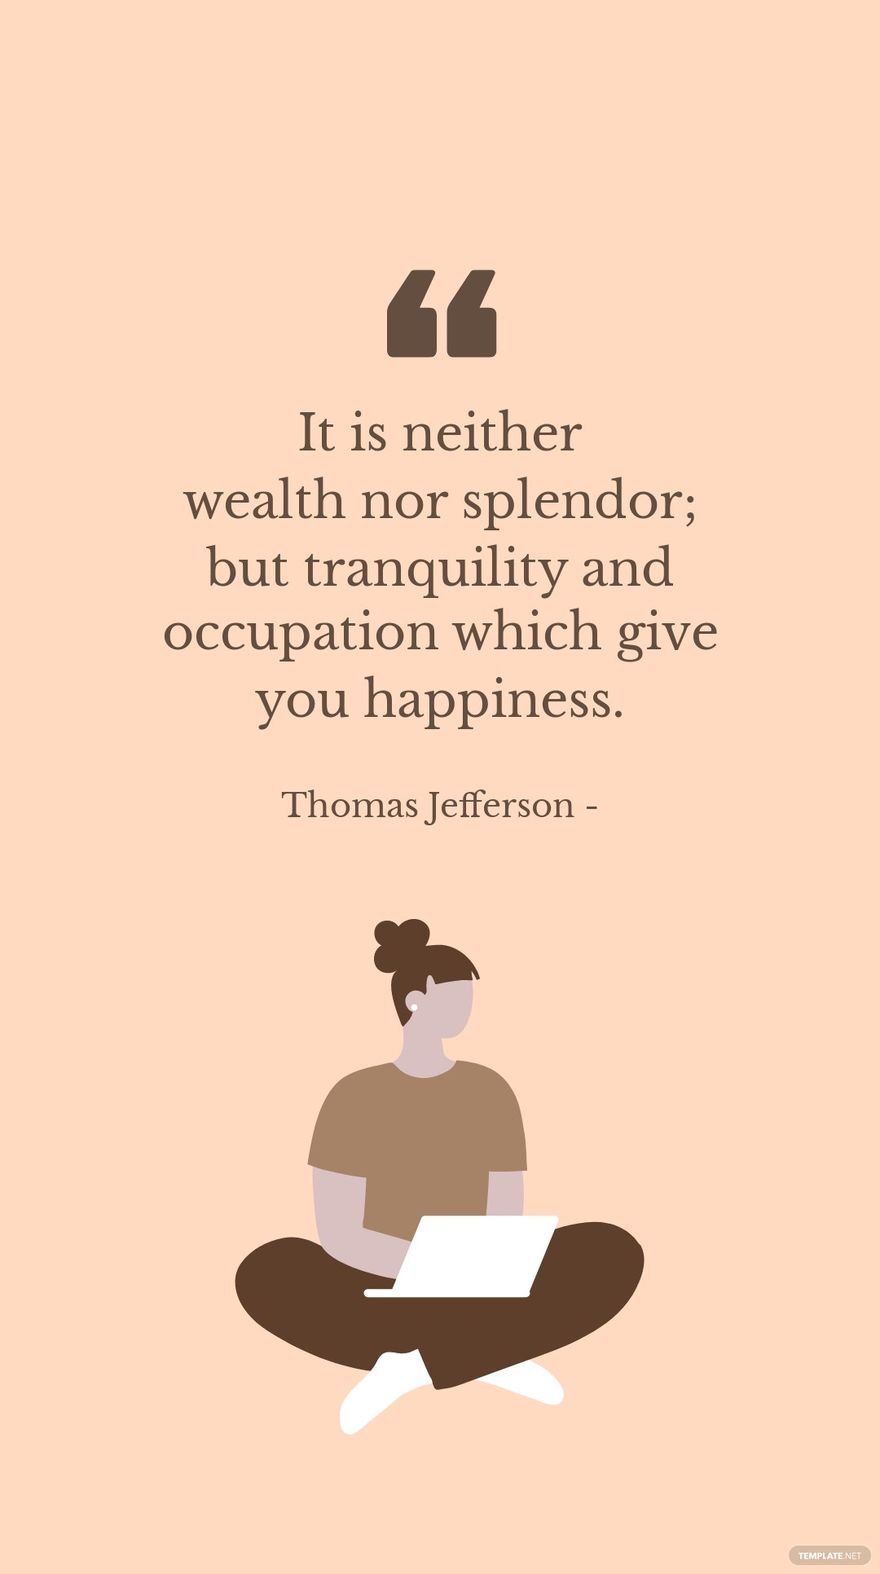 Thomas Jefferson - It is neither wealth nor splendor; but tranquility and occupation which give you happiness.